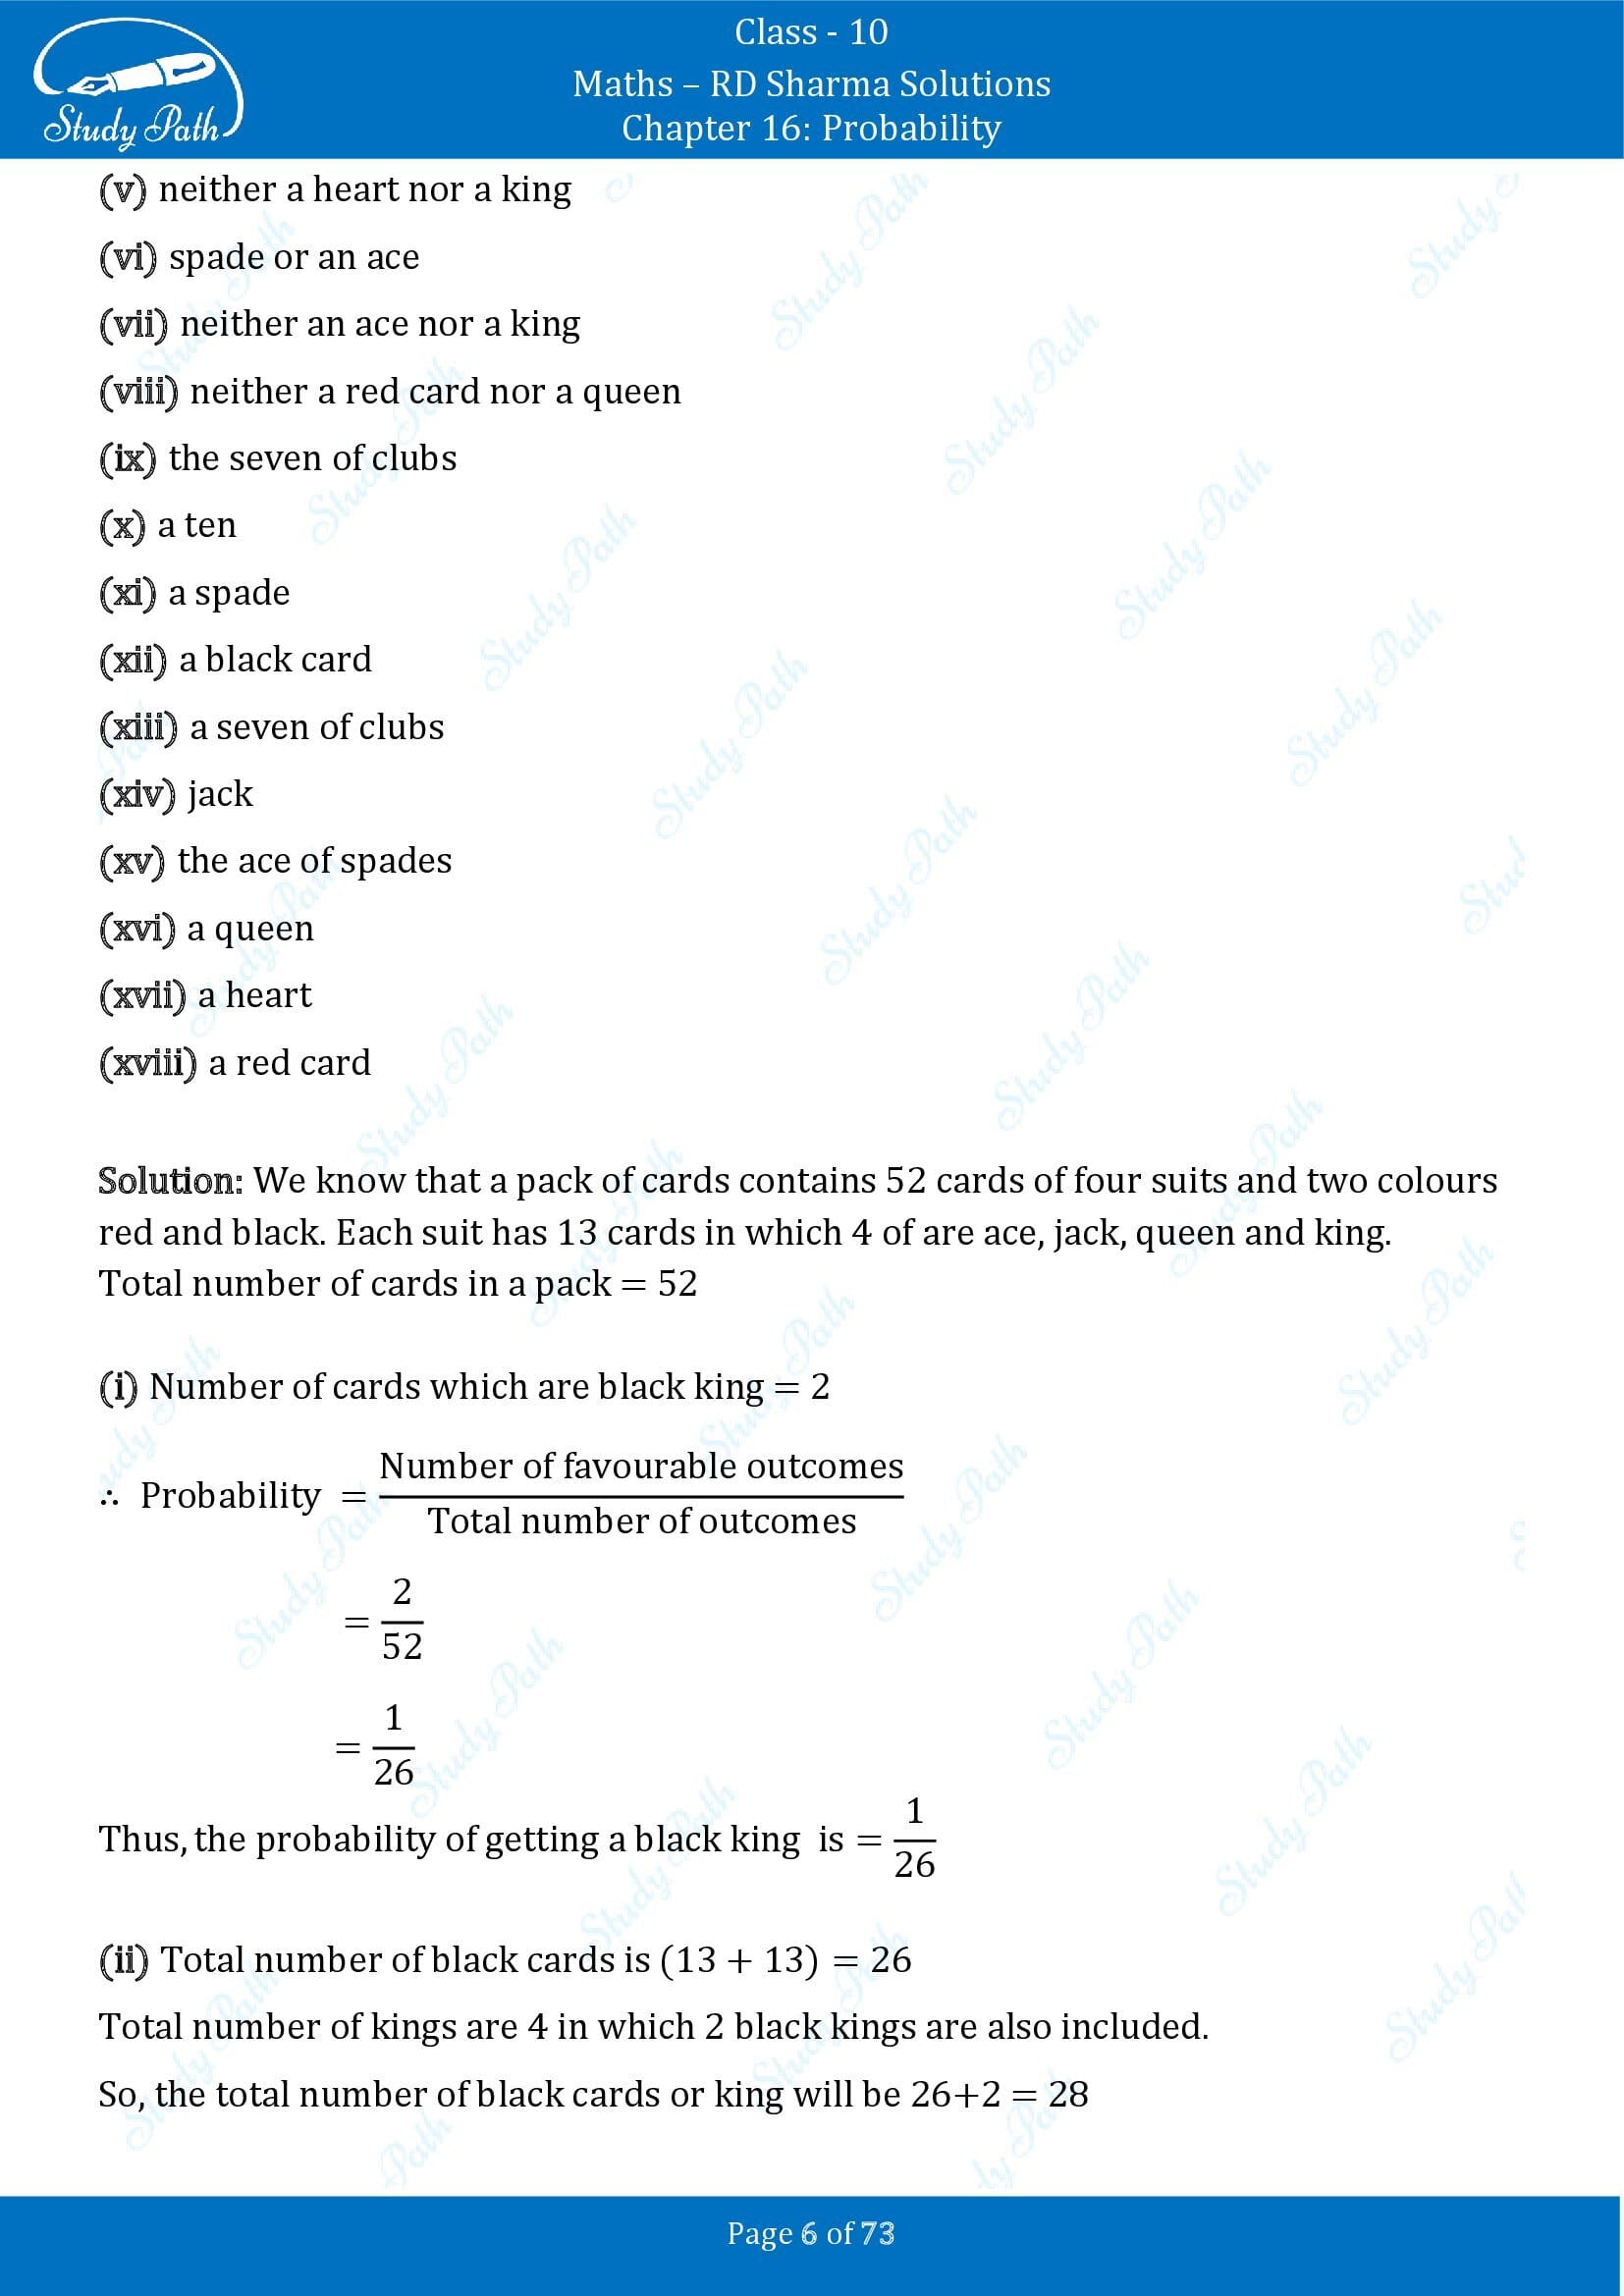 RD Sharma Solutions Class 10 Chapter 16 Probability Exercise 16.1 00006